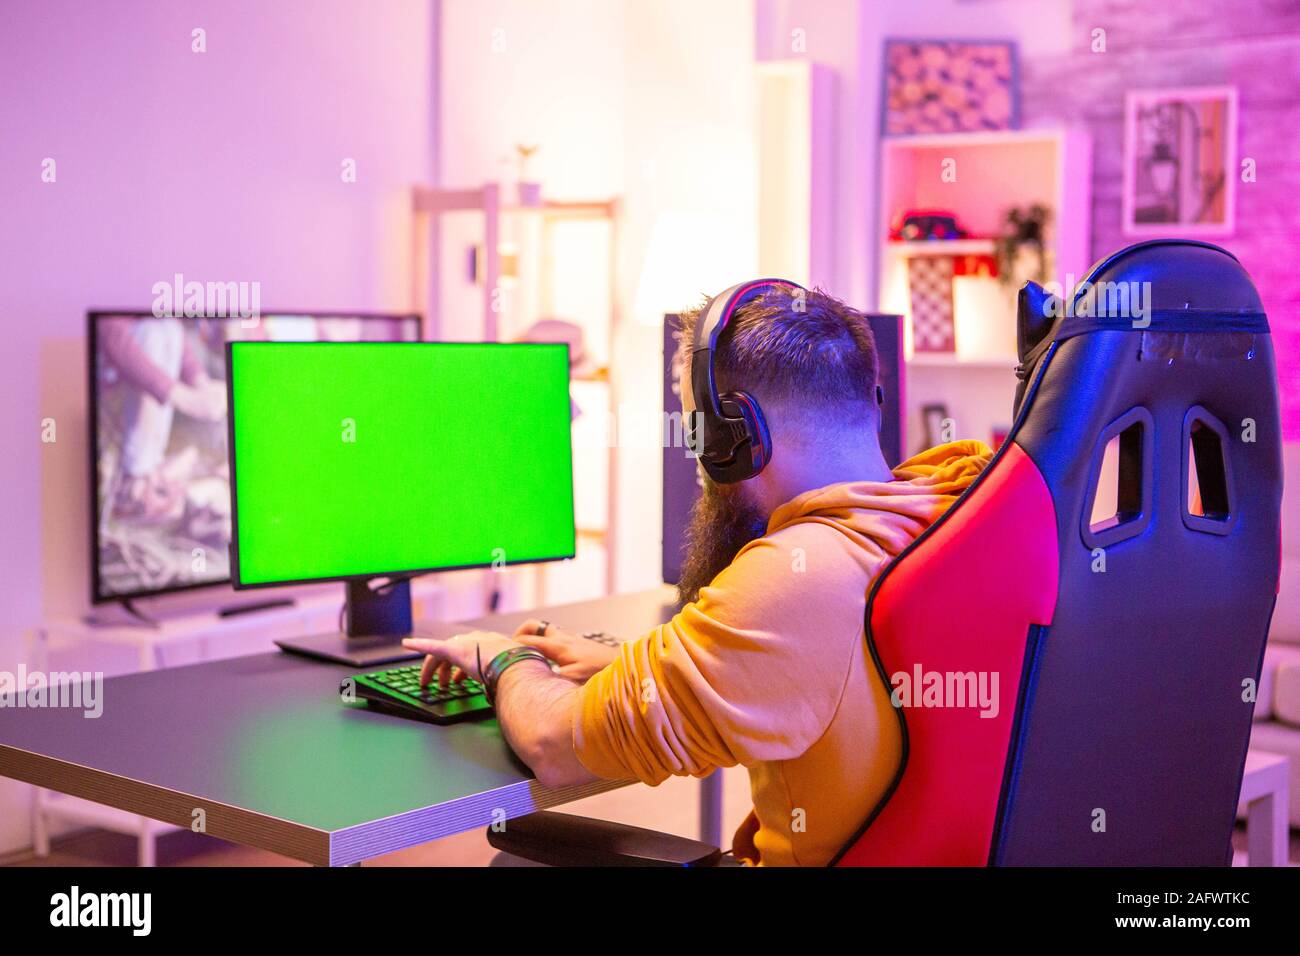 Man Playing On Powerfull Gaming Pc In A Room With Neon Lights On A